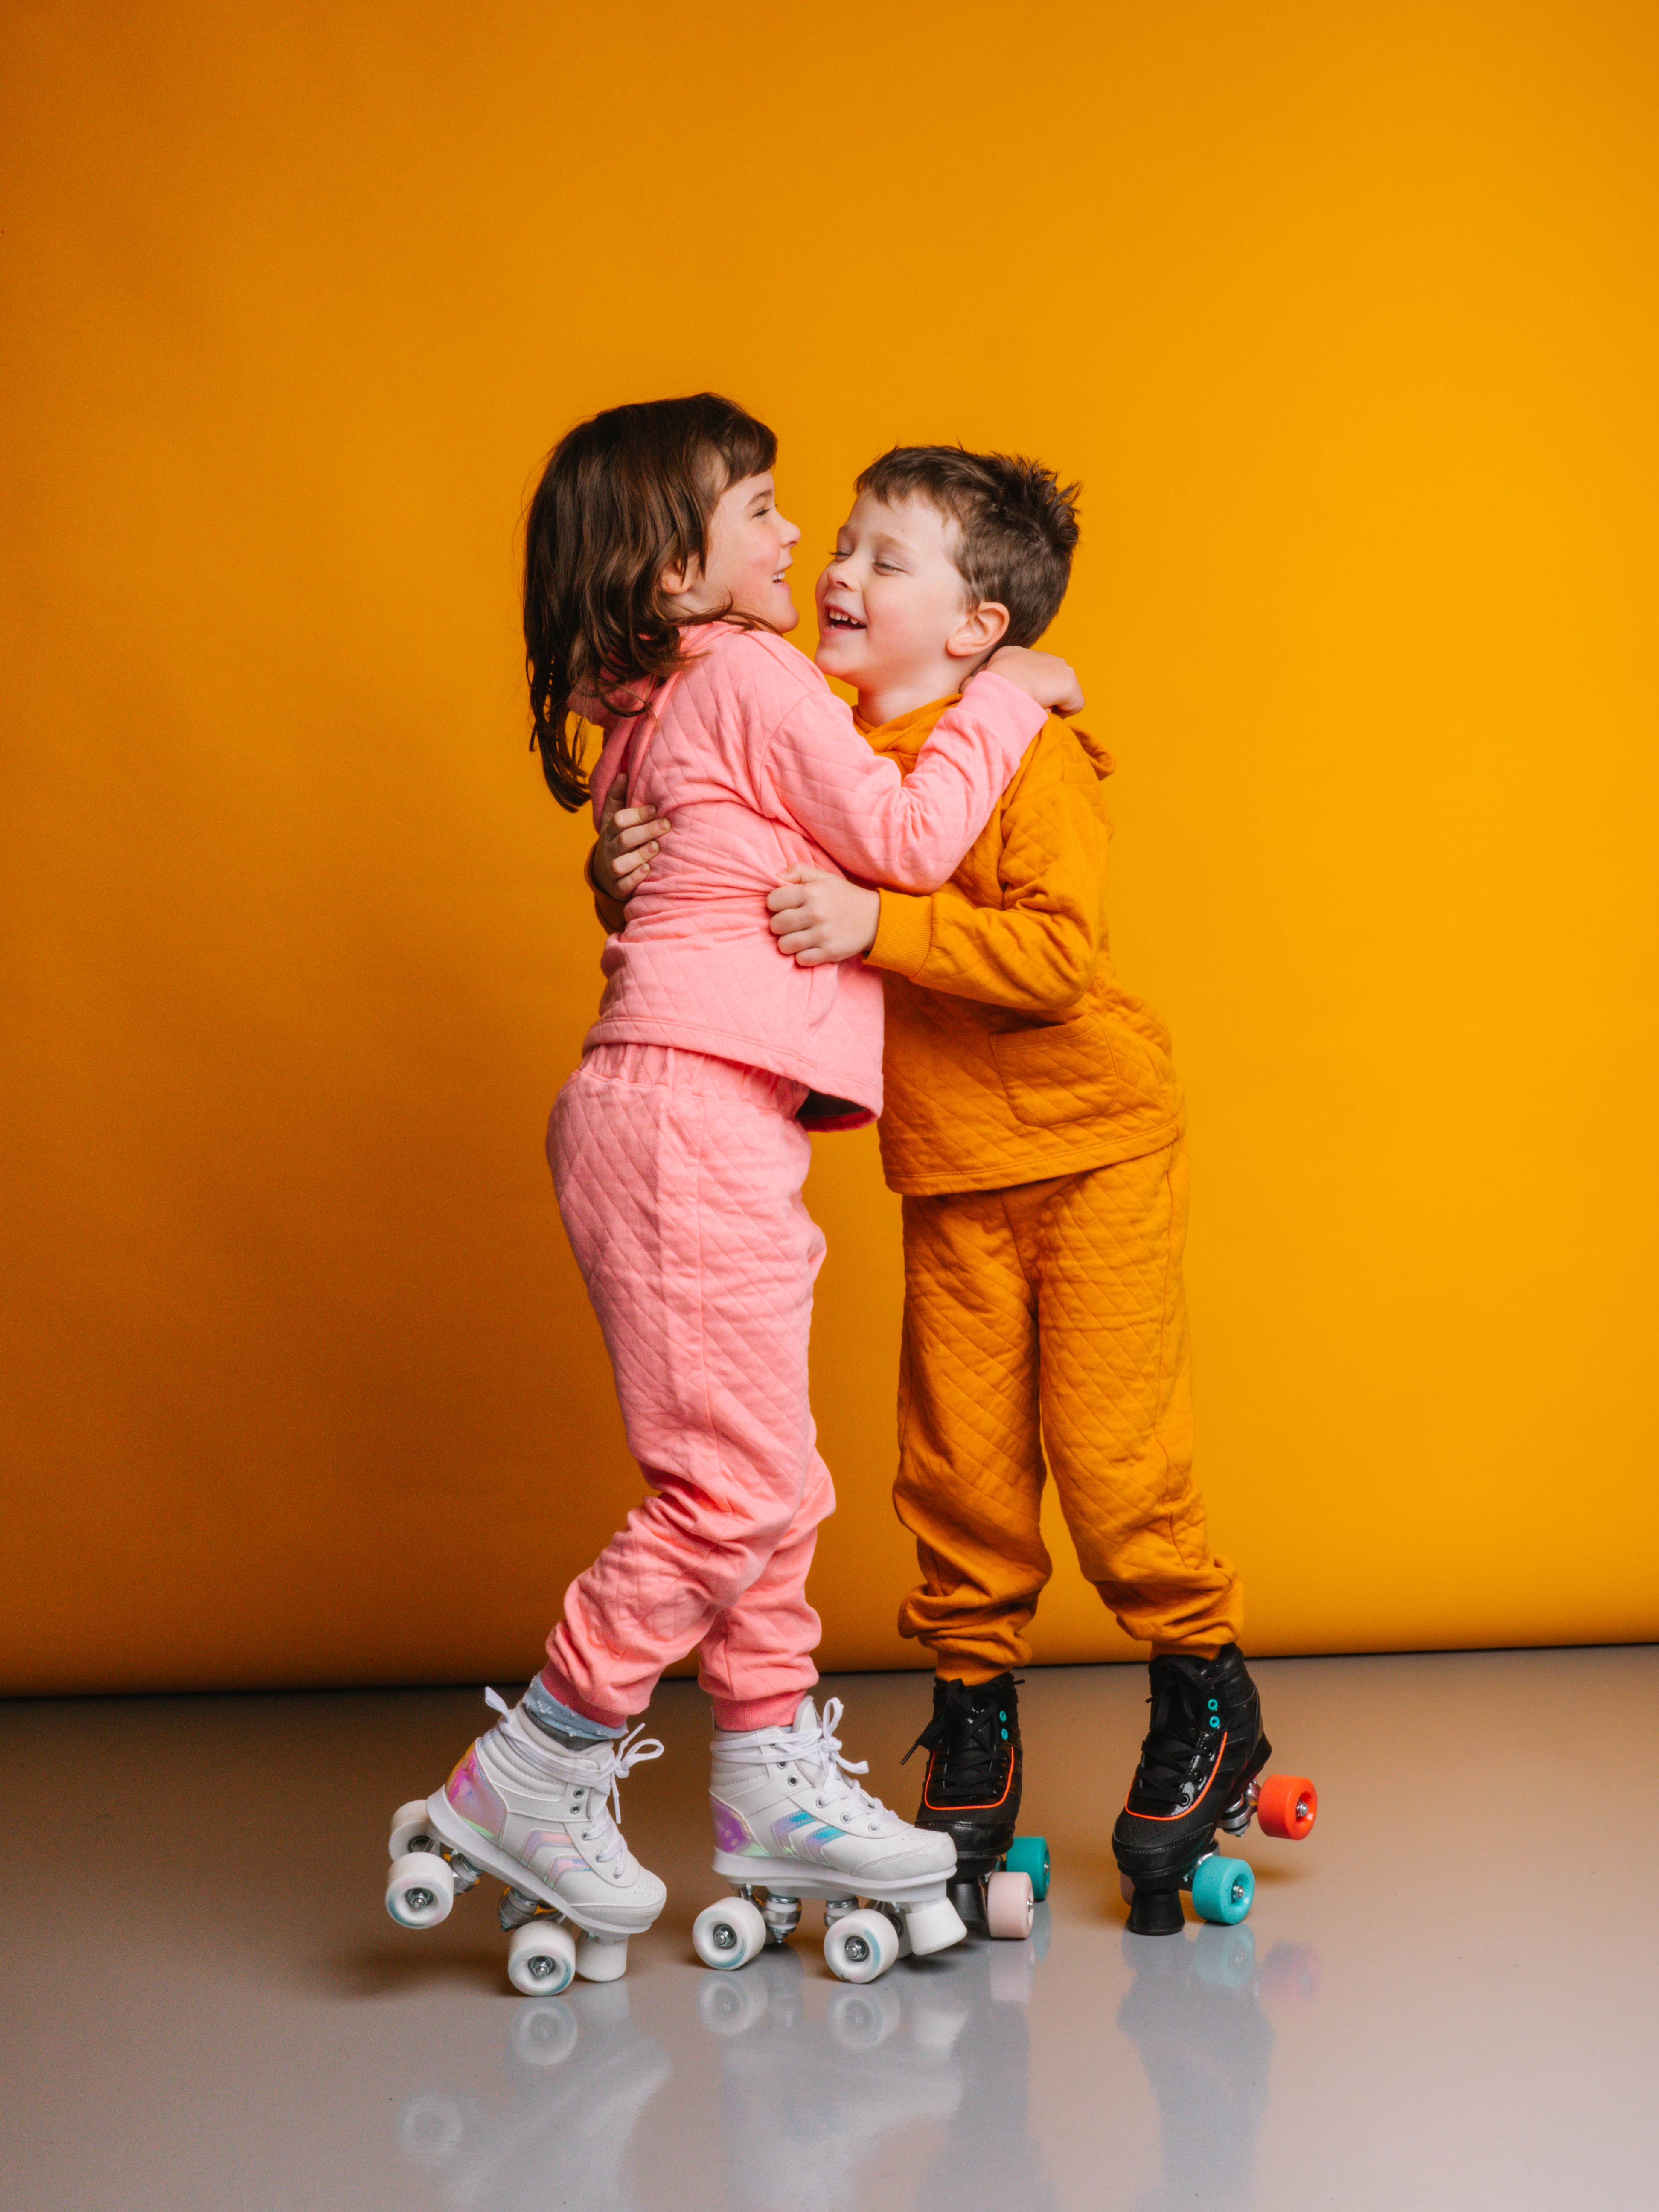 young boy and girl on roller skates